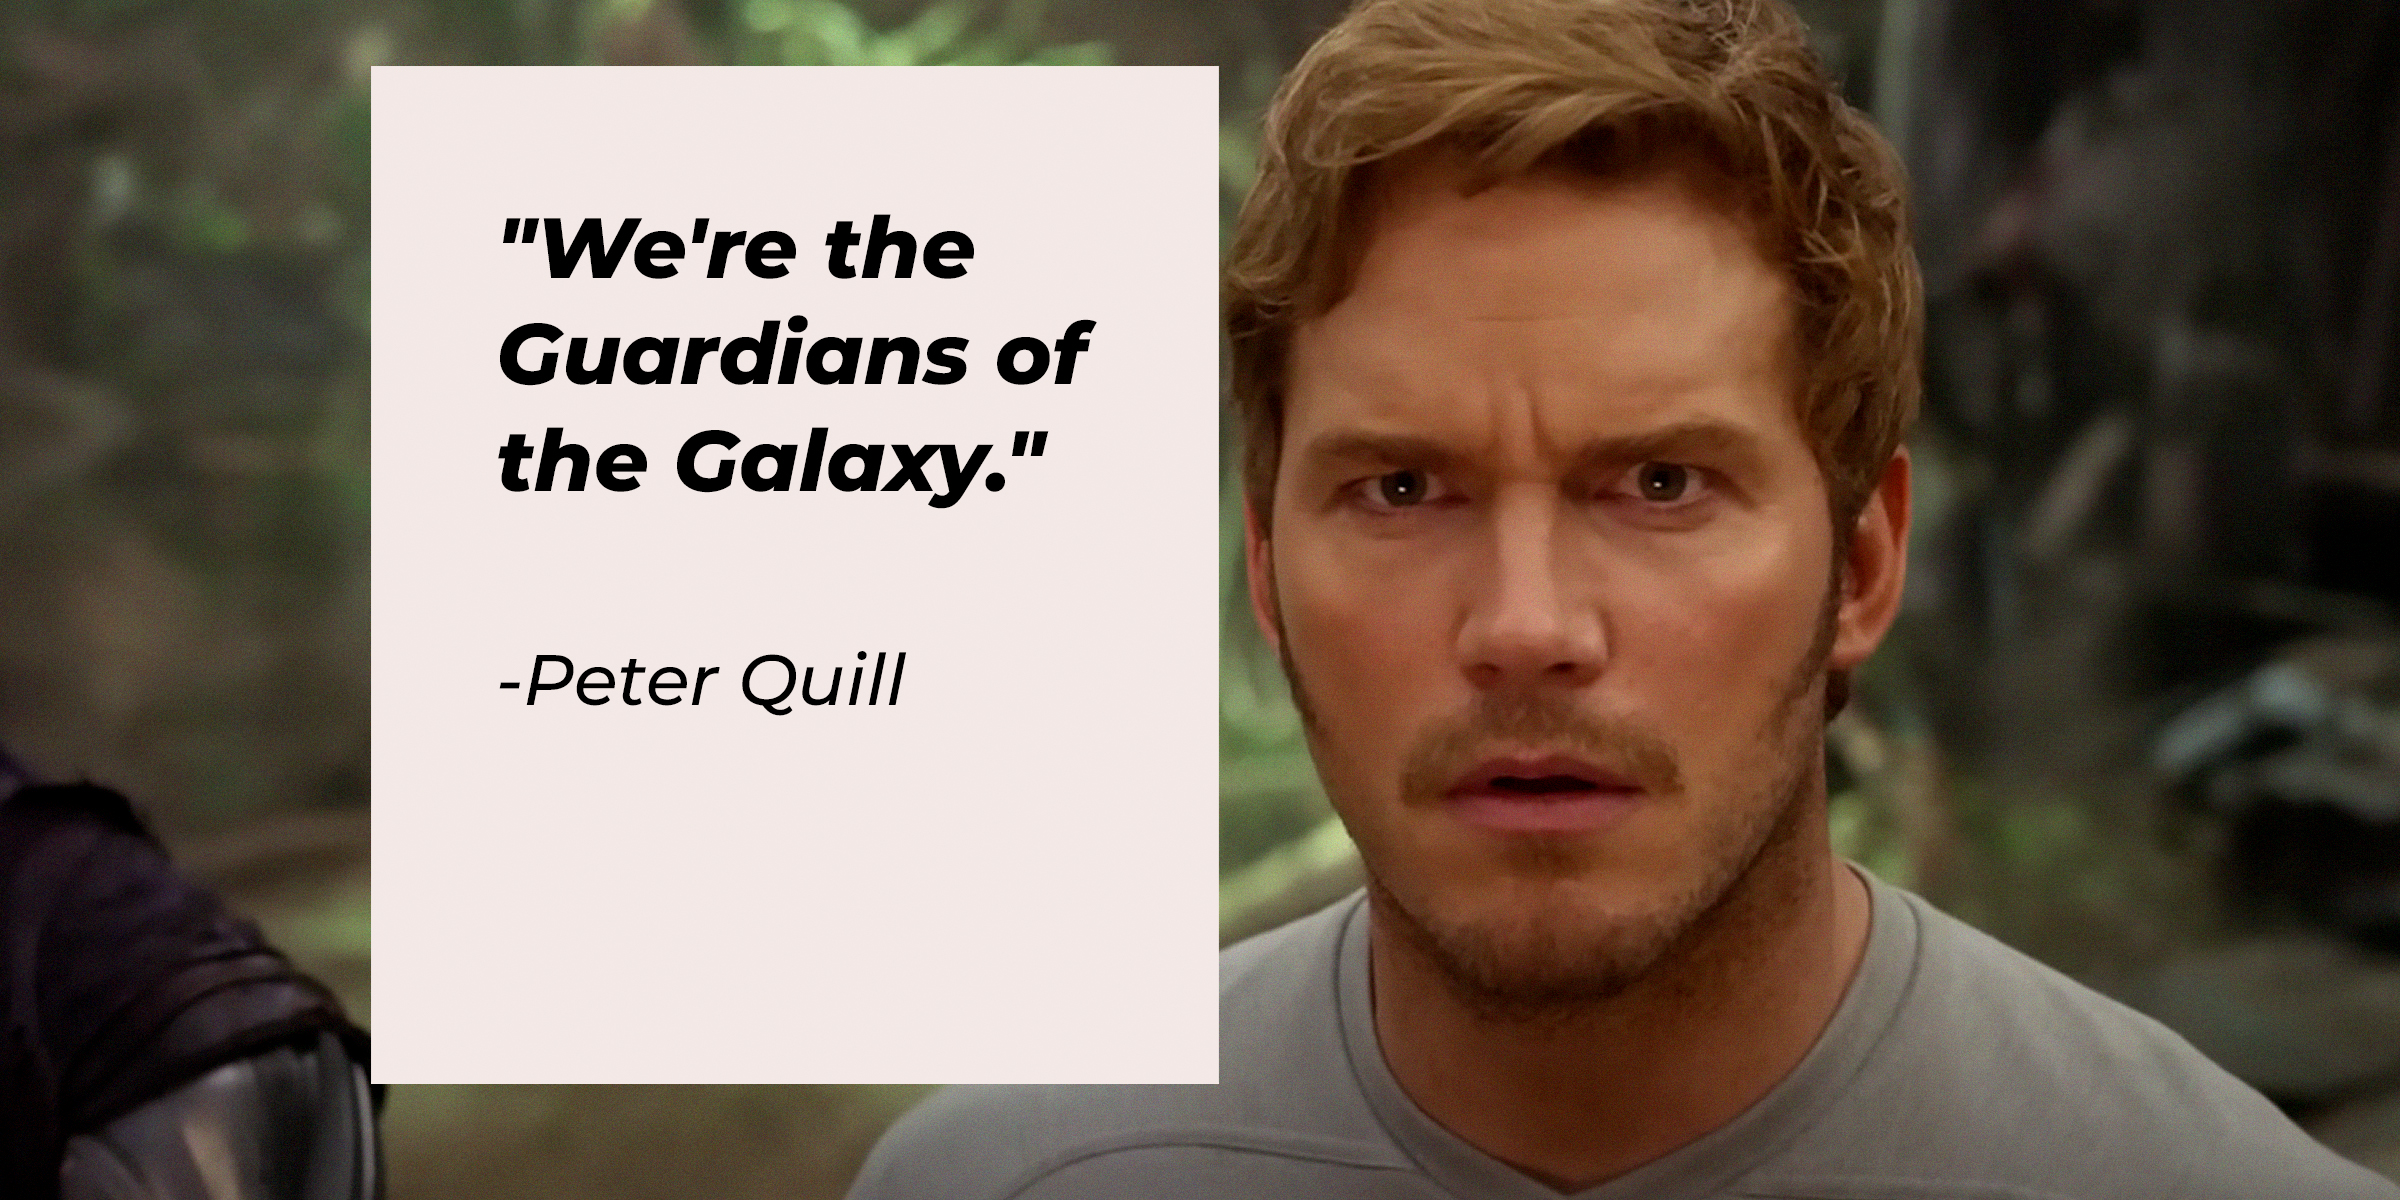 Peter Quill's quote, "We're the Guardians of the Galaxy." | Image: youtube.com/marvel